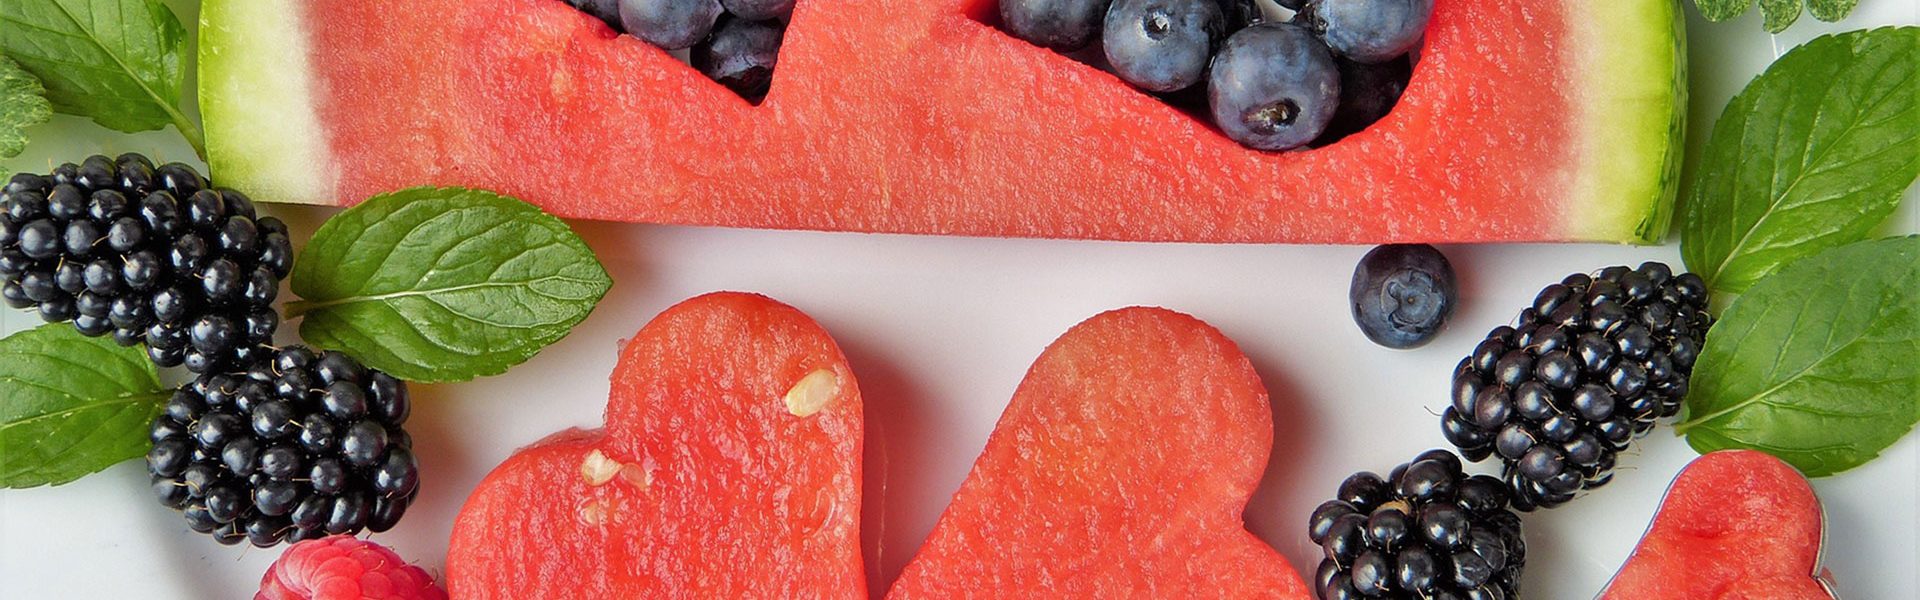 How You Eat Fruit Matters for Your Teeth